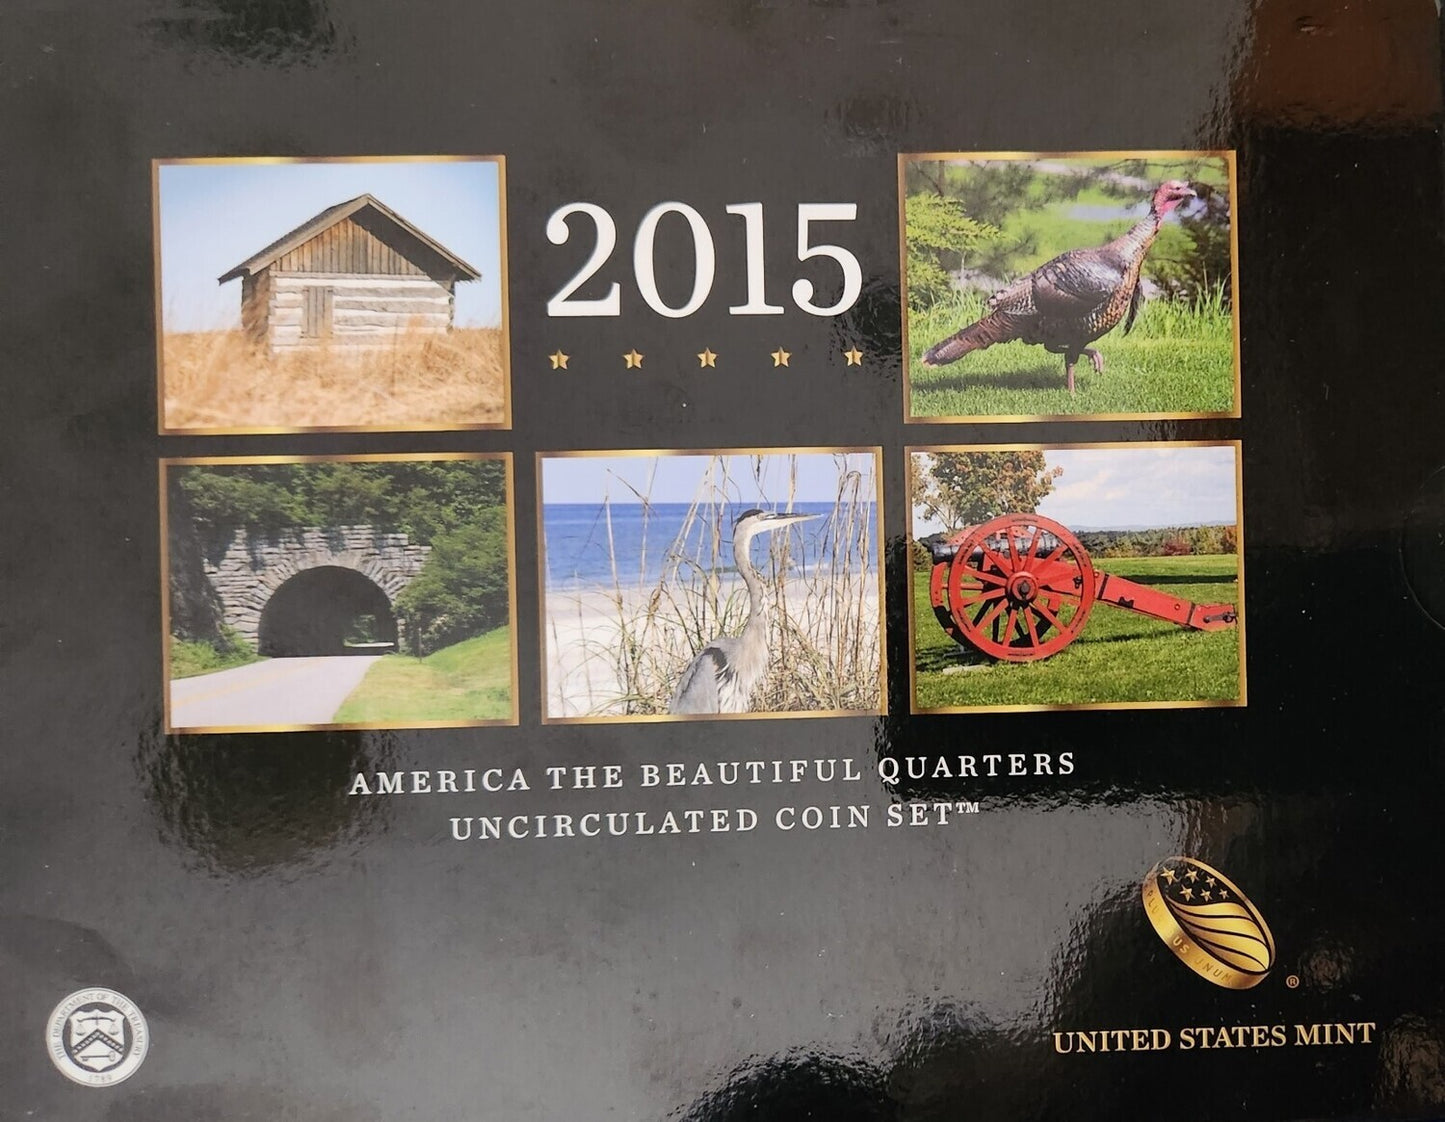 2015 - America The Beautiful Quarters - Uncirculated Coin Set